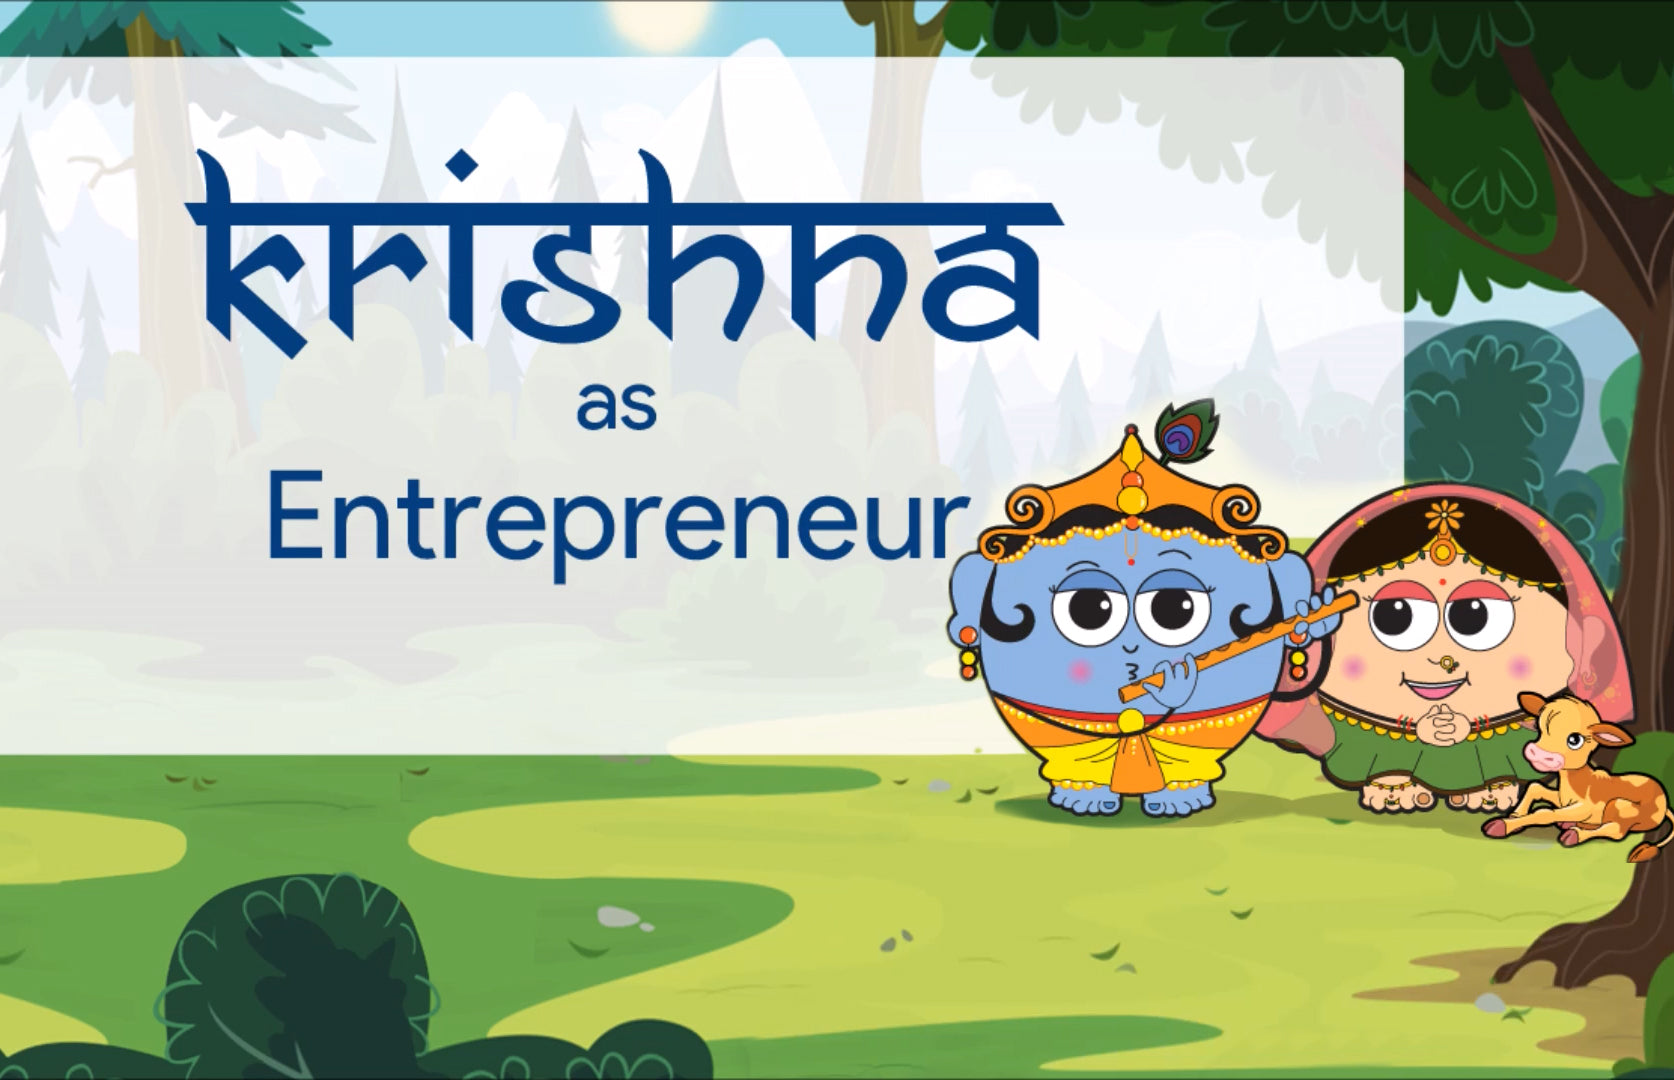 7 Skills Entrepreneurs can learn from Lord Krishna